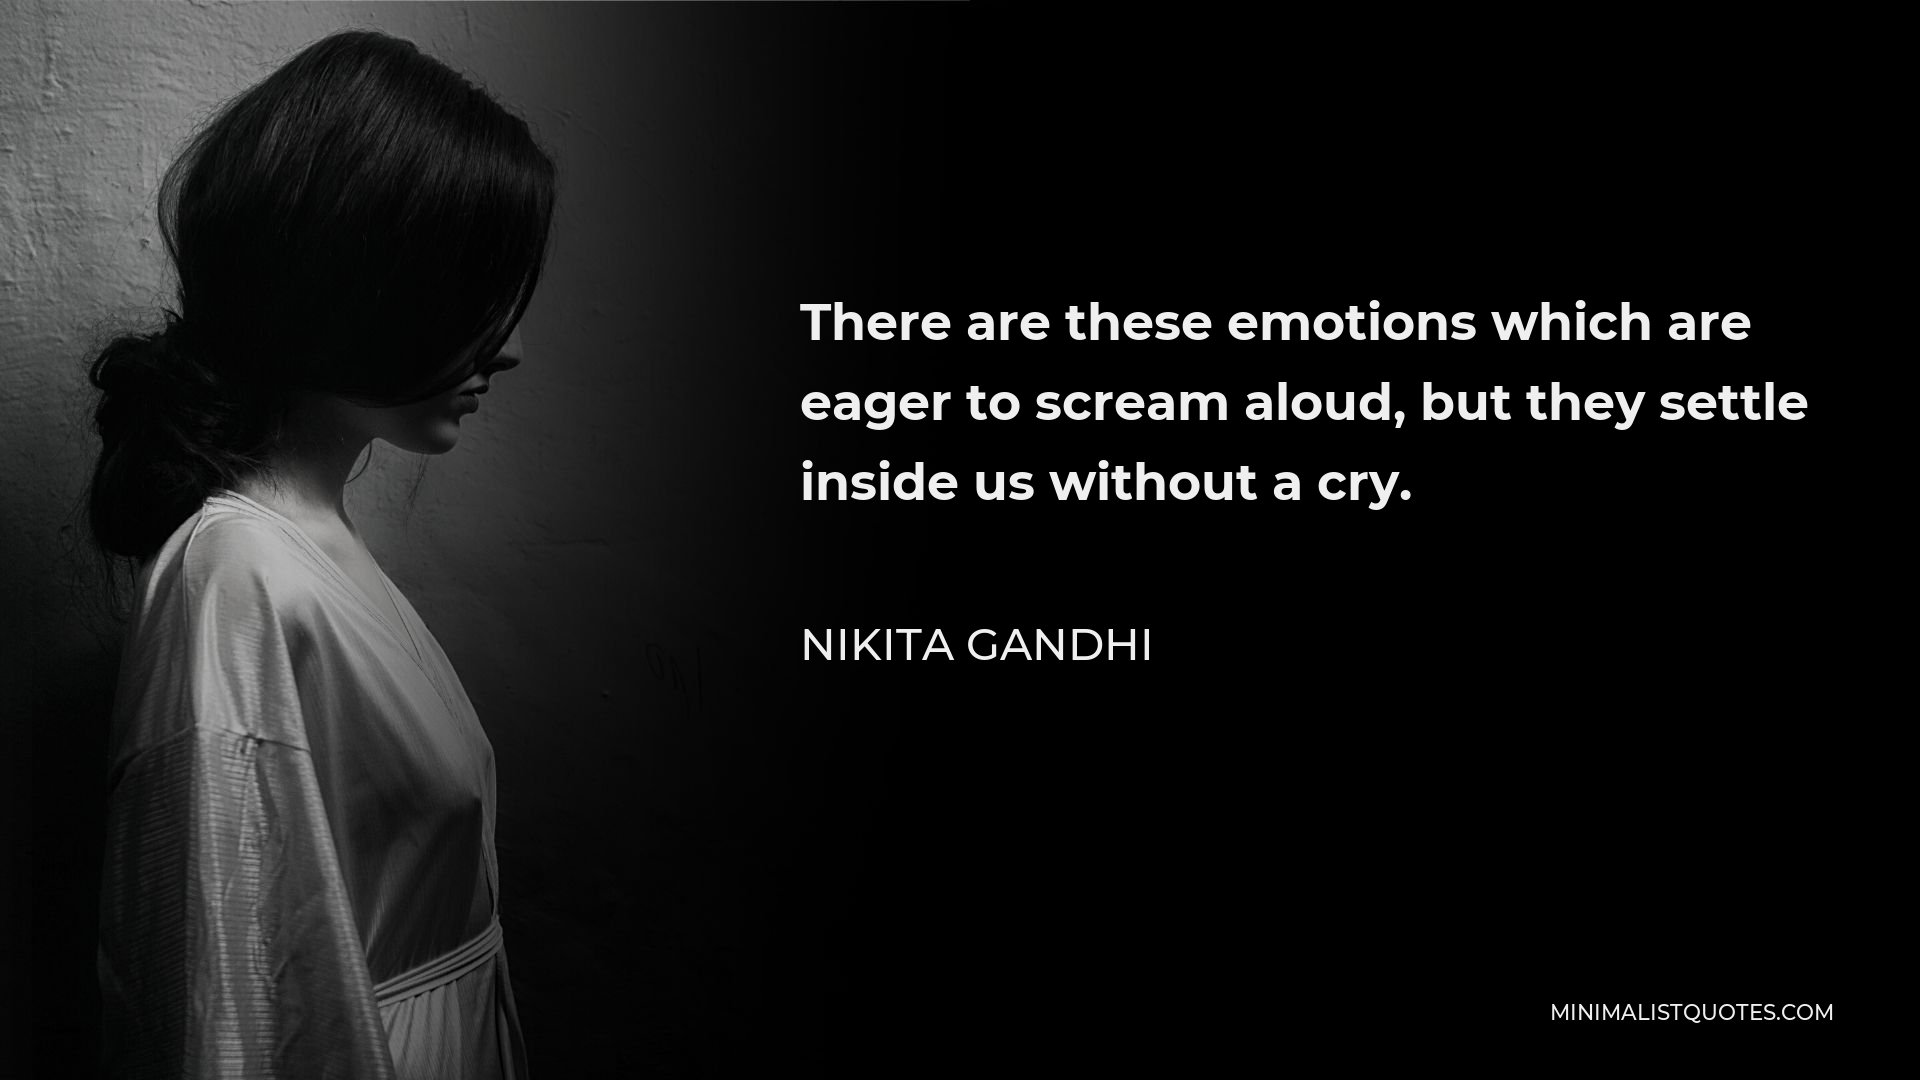 Nikita Gandhi Quote - There are these emotions which are eager to scream aloud, but they settle inside us without a cry.